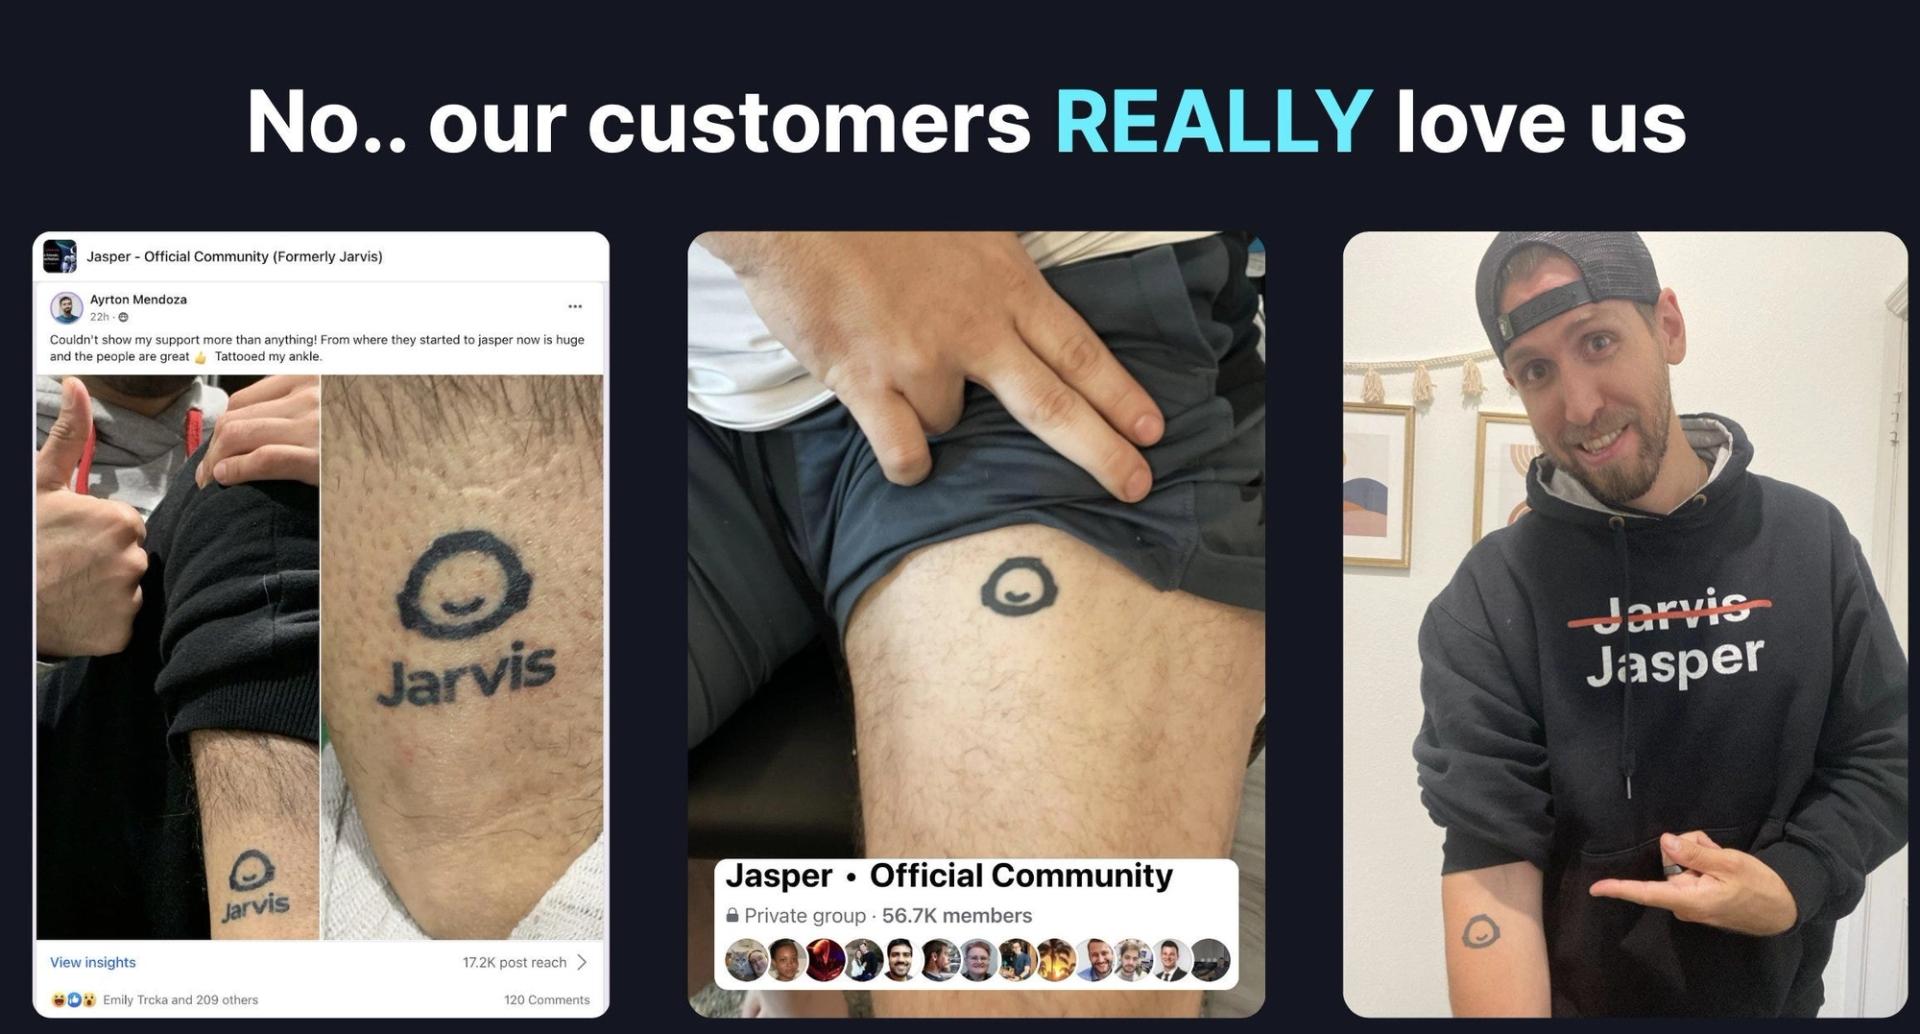 Several images depicting Jasper users with tattoos of the company's logo.